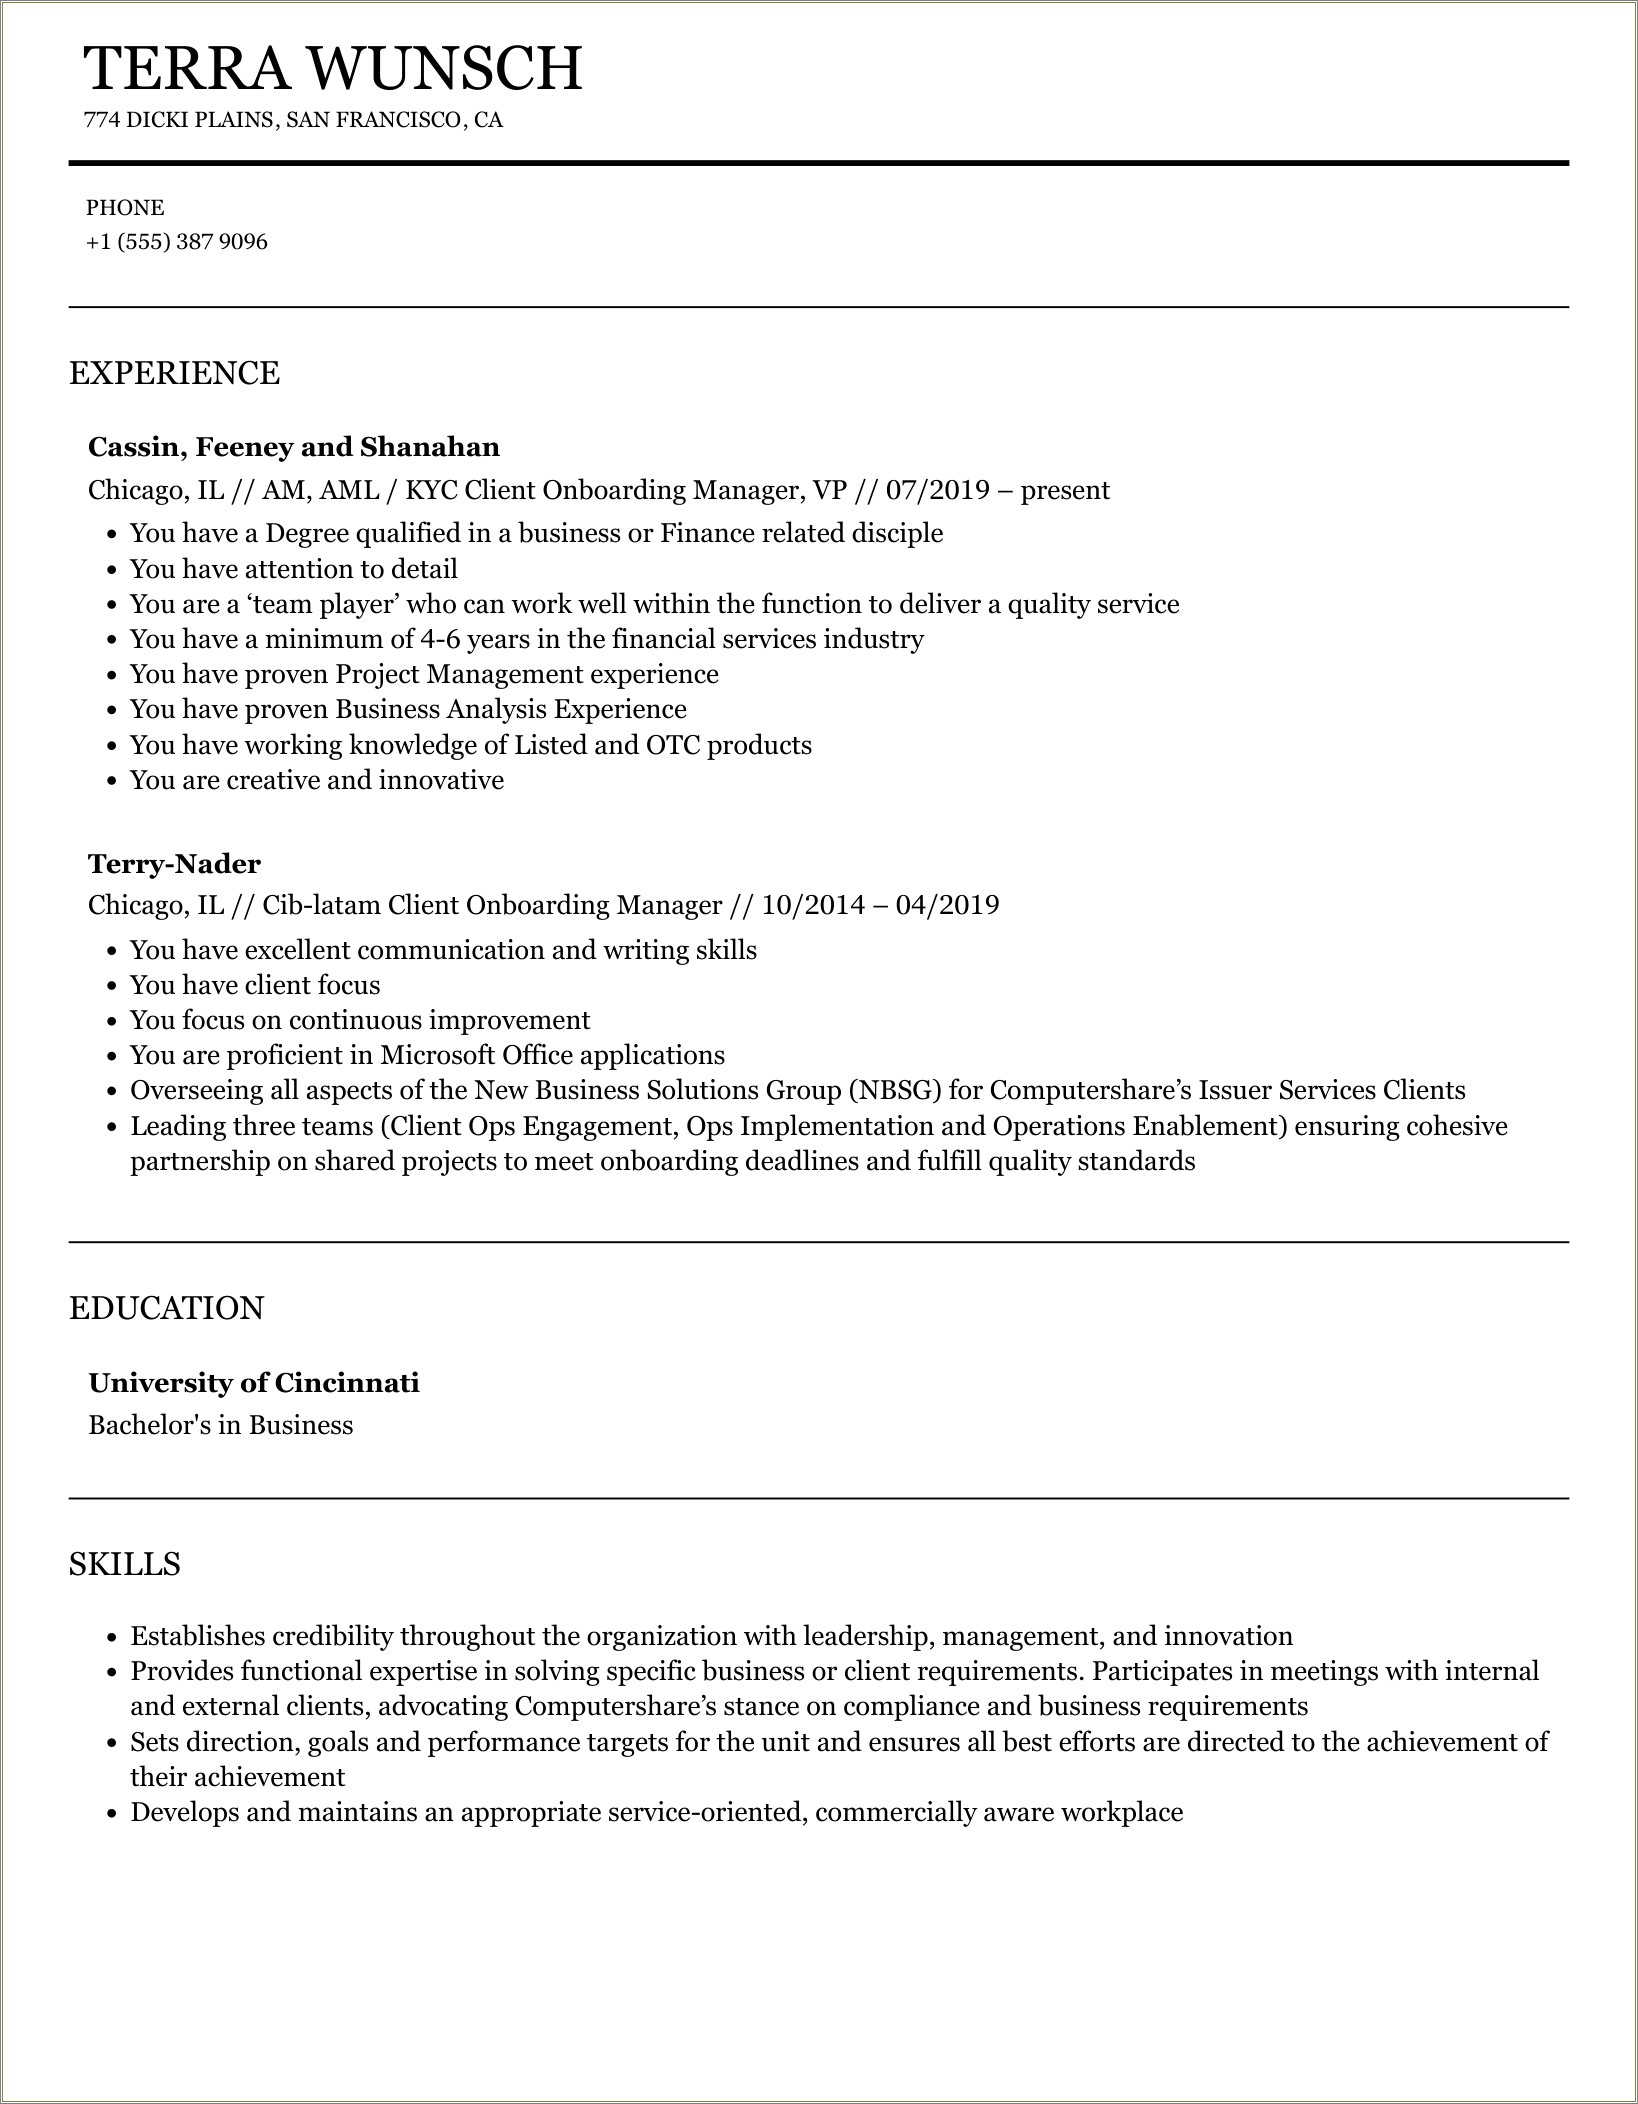 Sample Resume For Client Onboarding Specialist